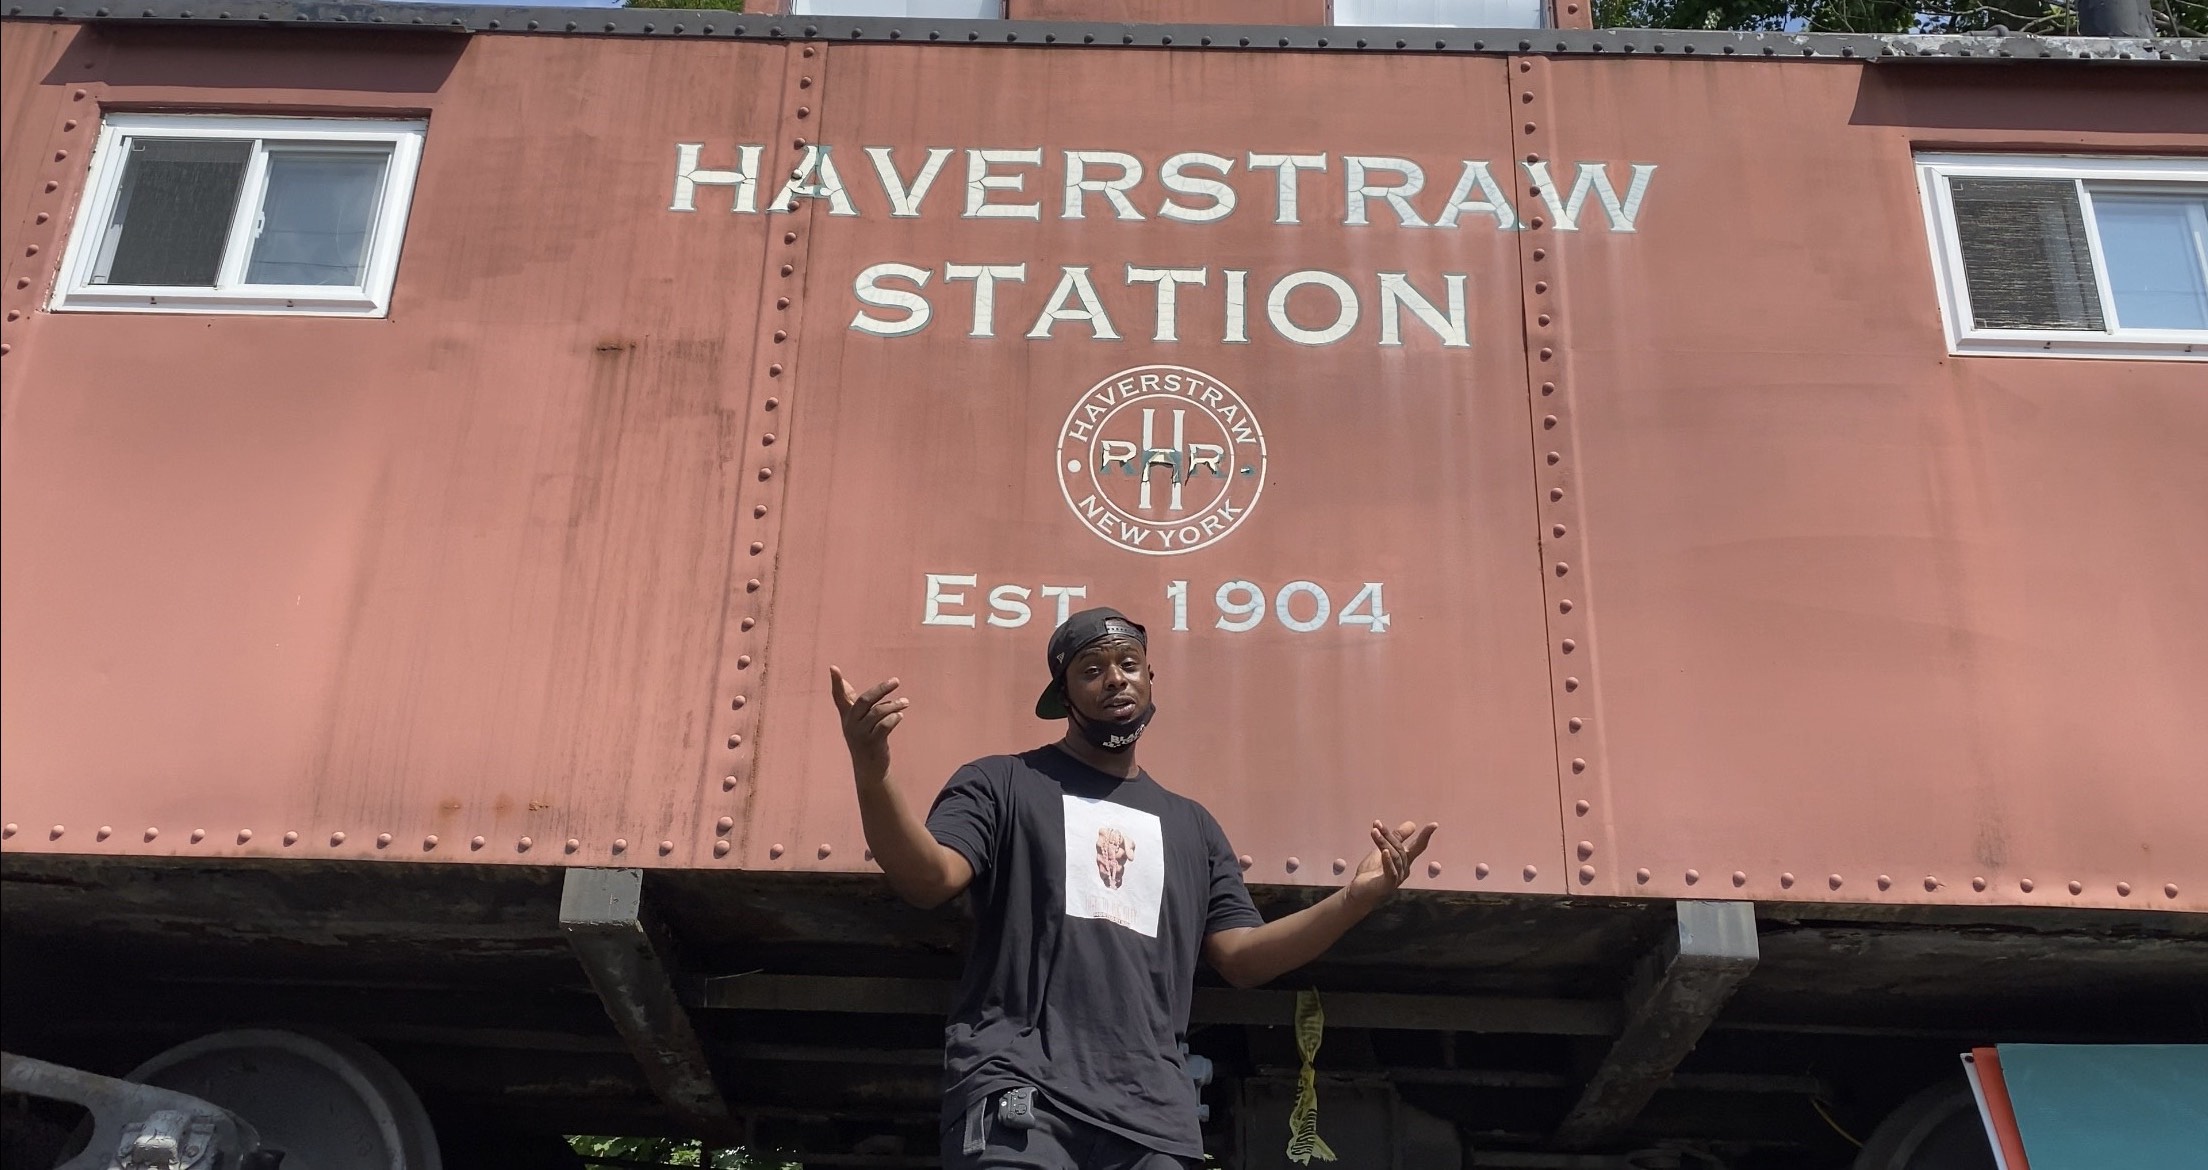 Content creator and musician from Haverstraw impacts  society through social media platforms